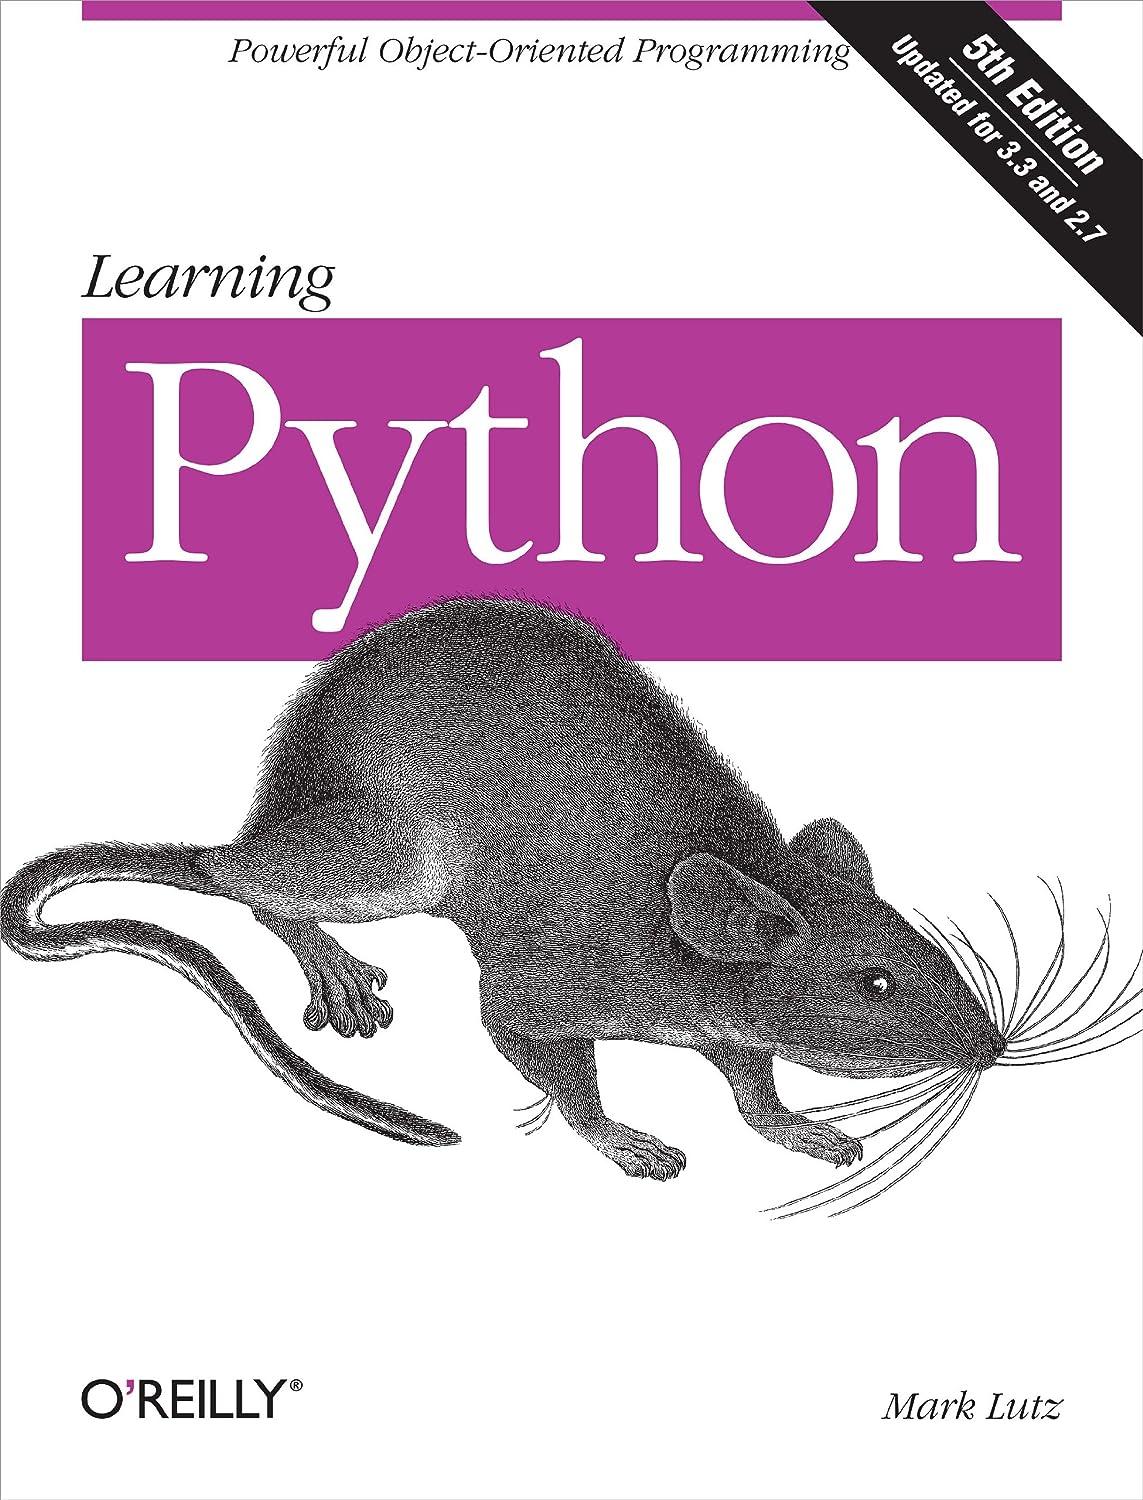 learning python 5th edition mark lutz 1449355730, 978-1449355739